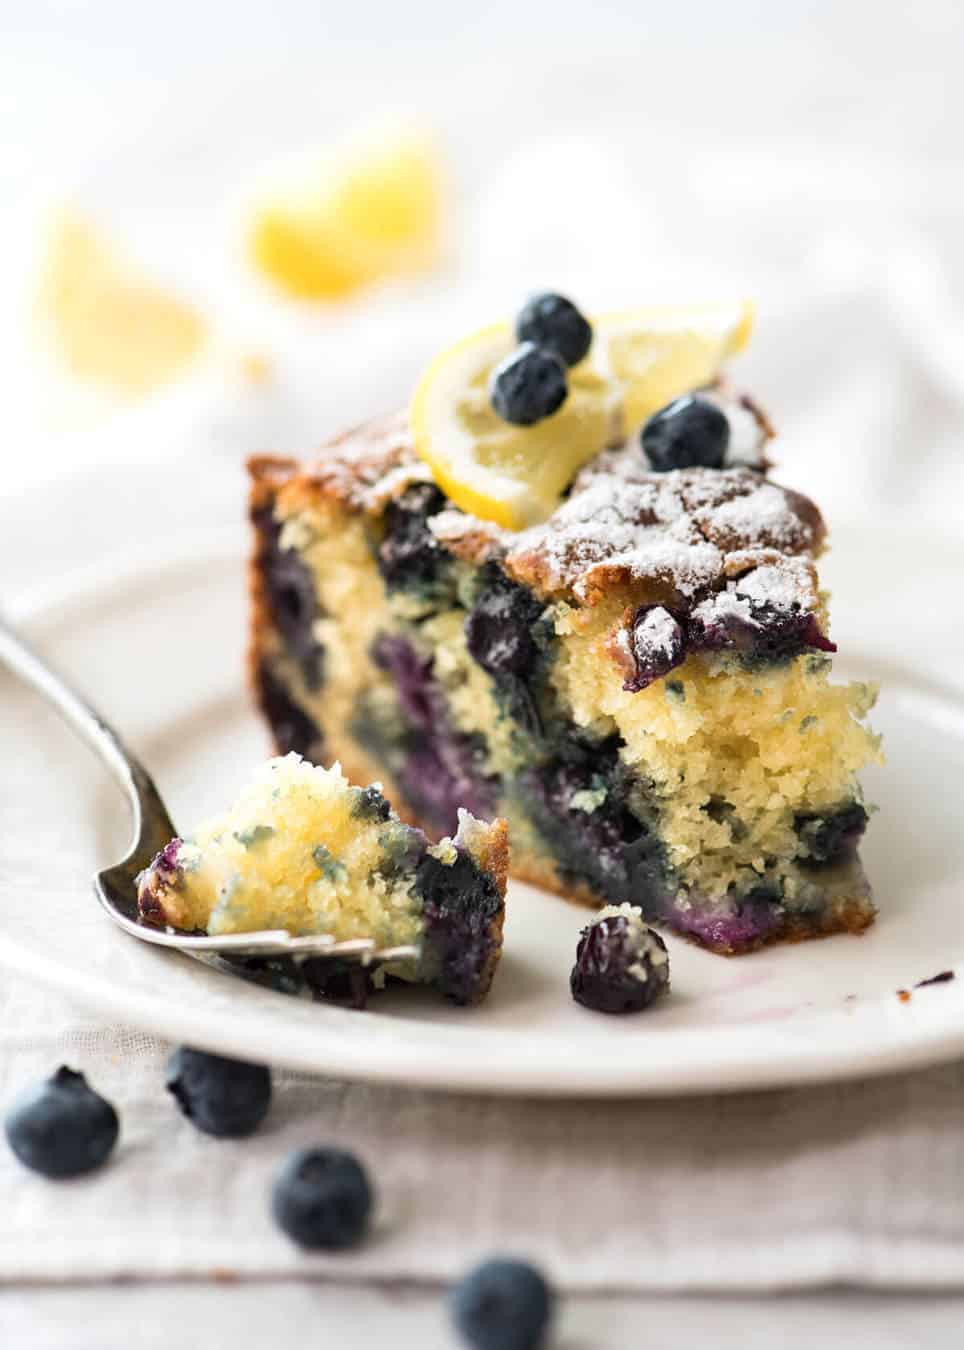 A lovely Blueberry Lemon Yoghurt Cake that's incredibly moist and astonishingly quick to make. www.recipetineats.com